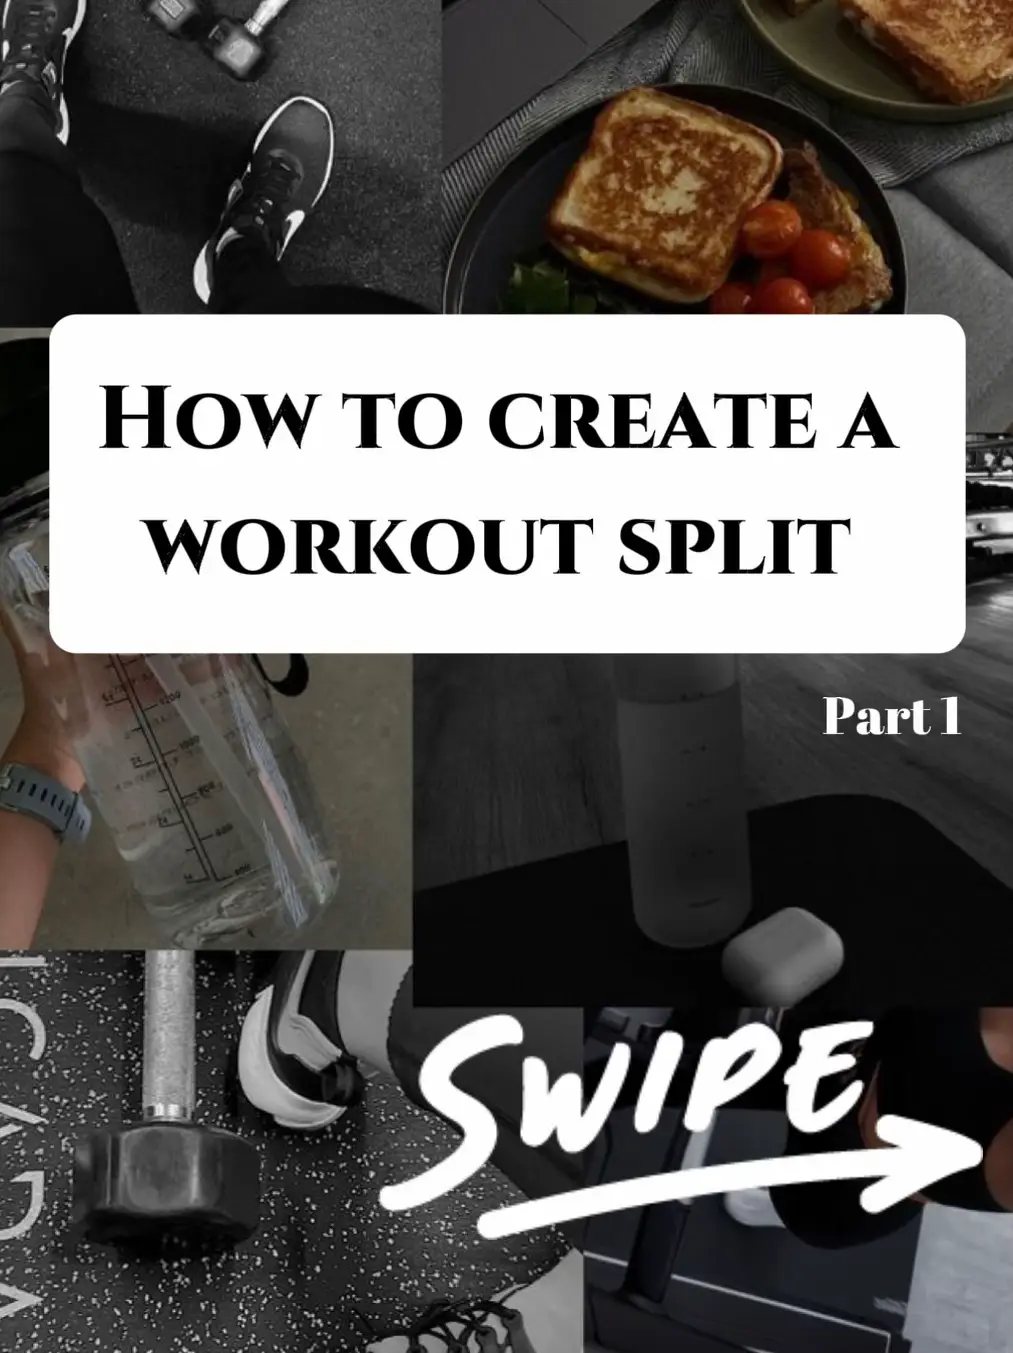 Save this workout-split for later💪⬇️ Workout Split Explained⬇️ 1️⃣ Pu